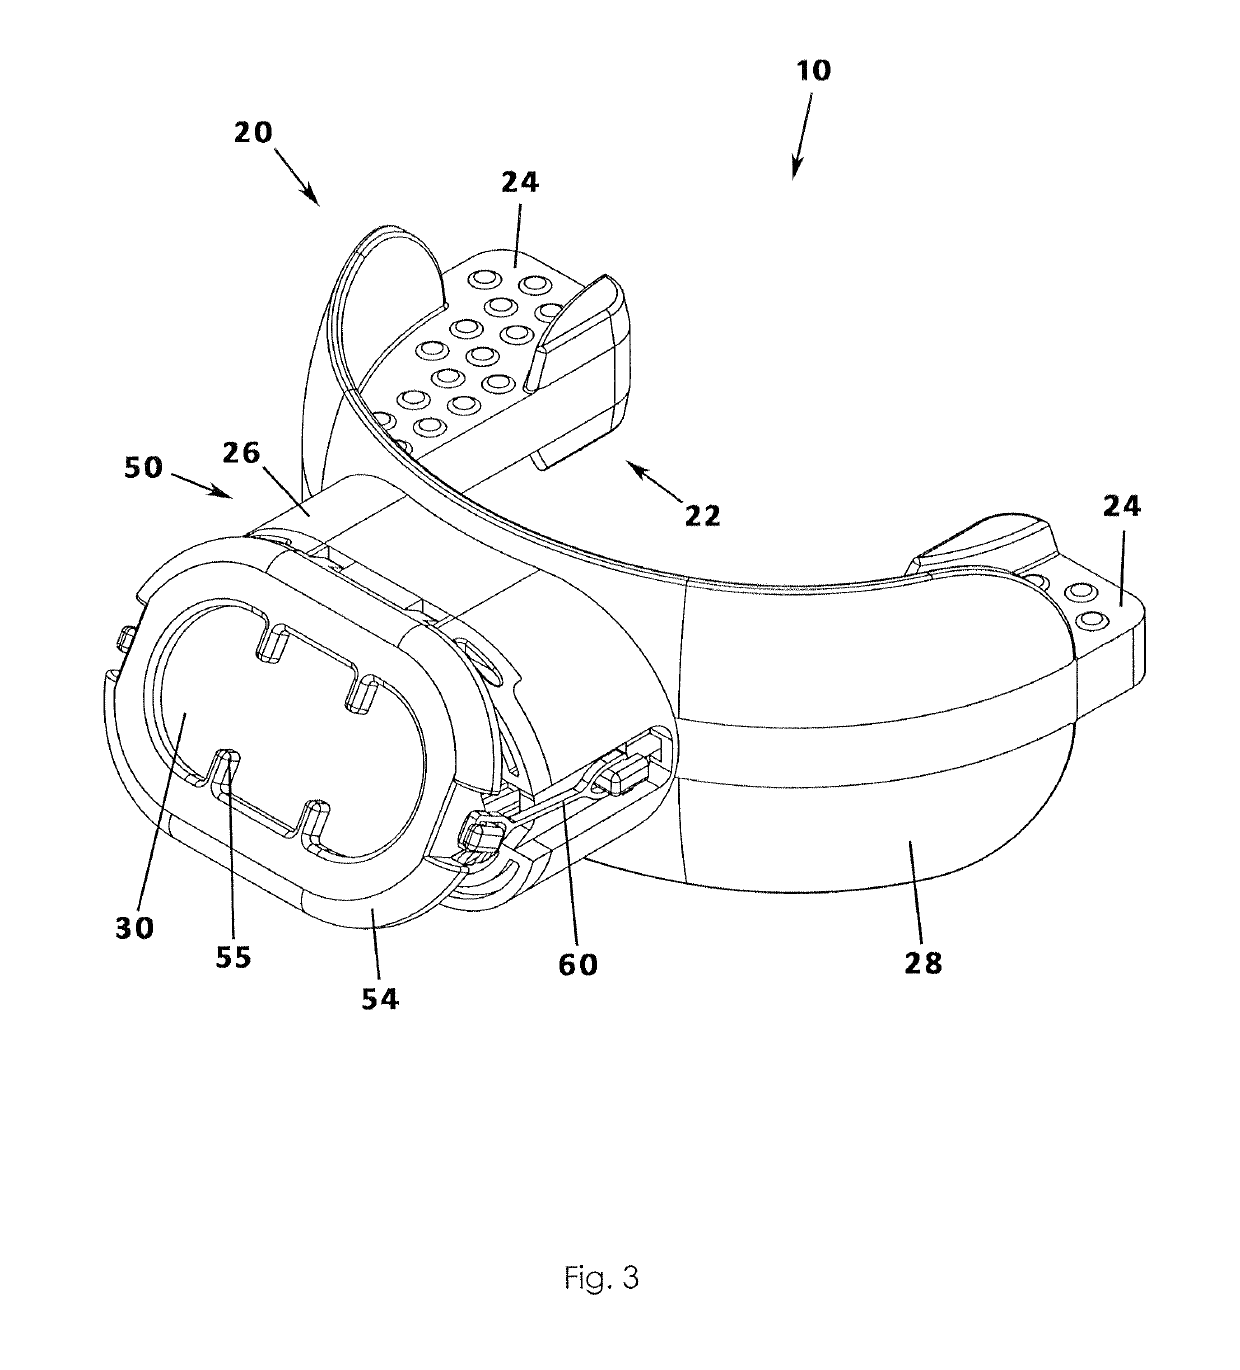 Bi-directional oxygenation apparatus for a non-intubated patient